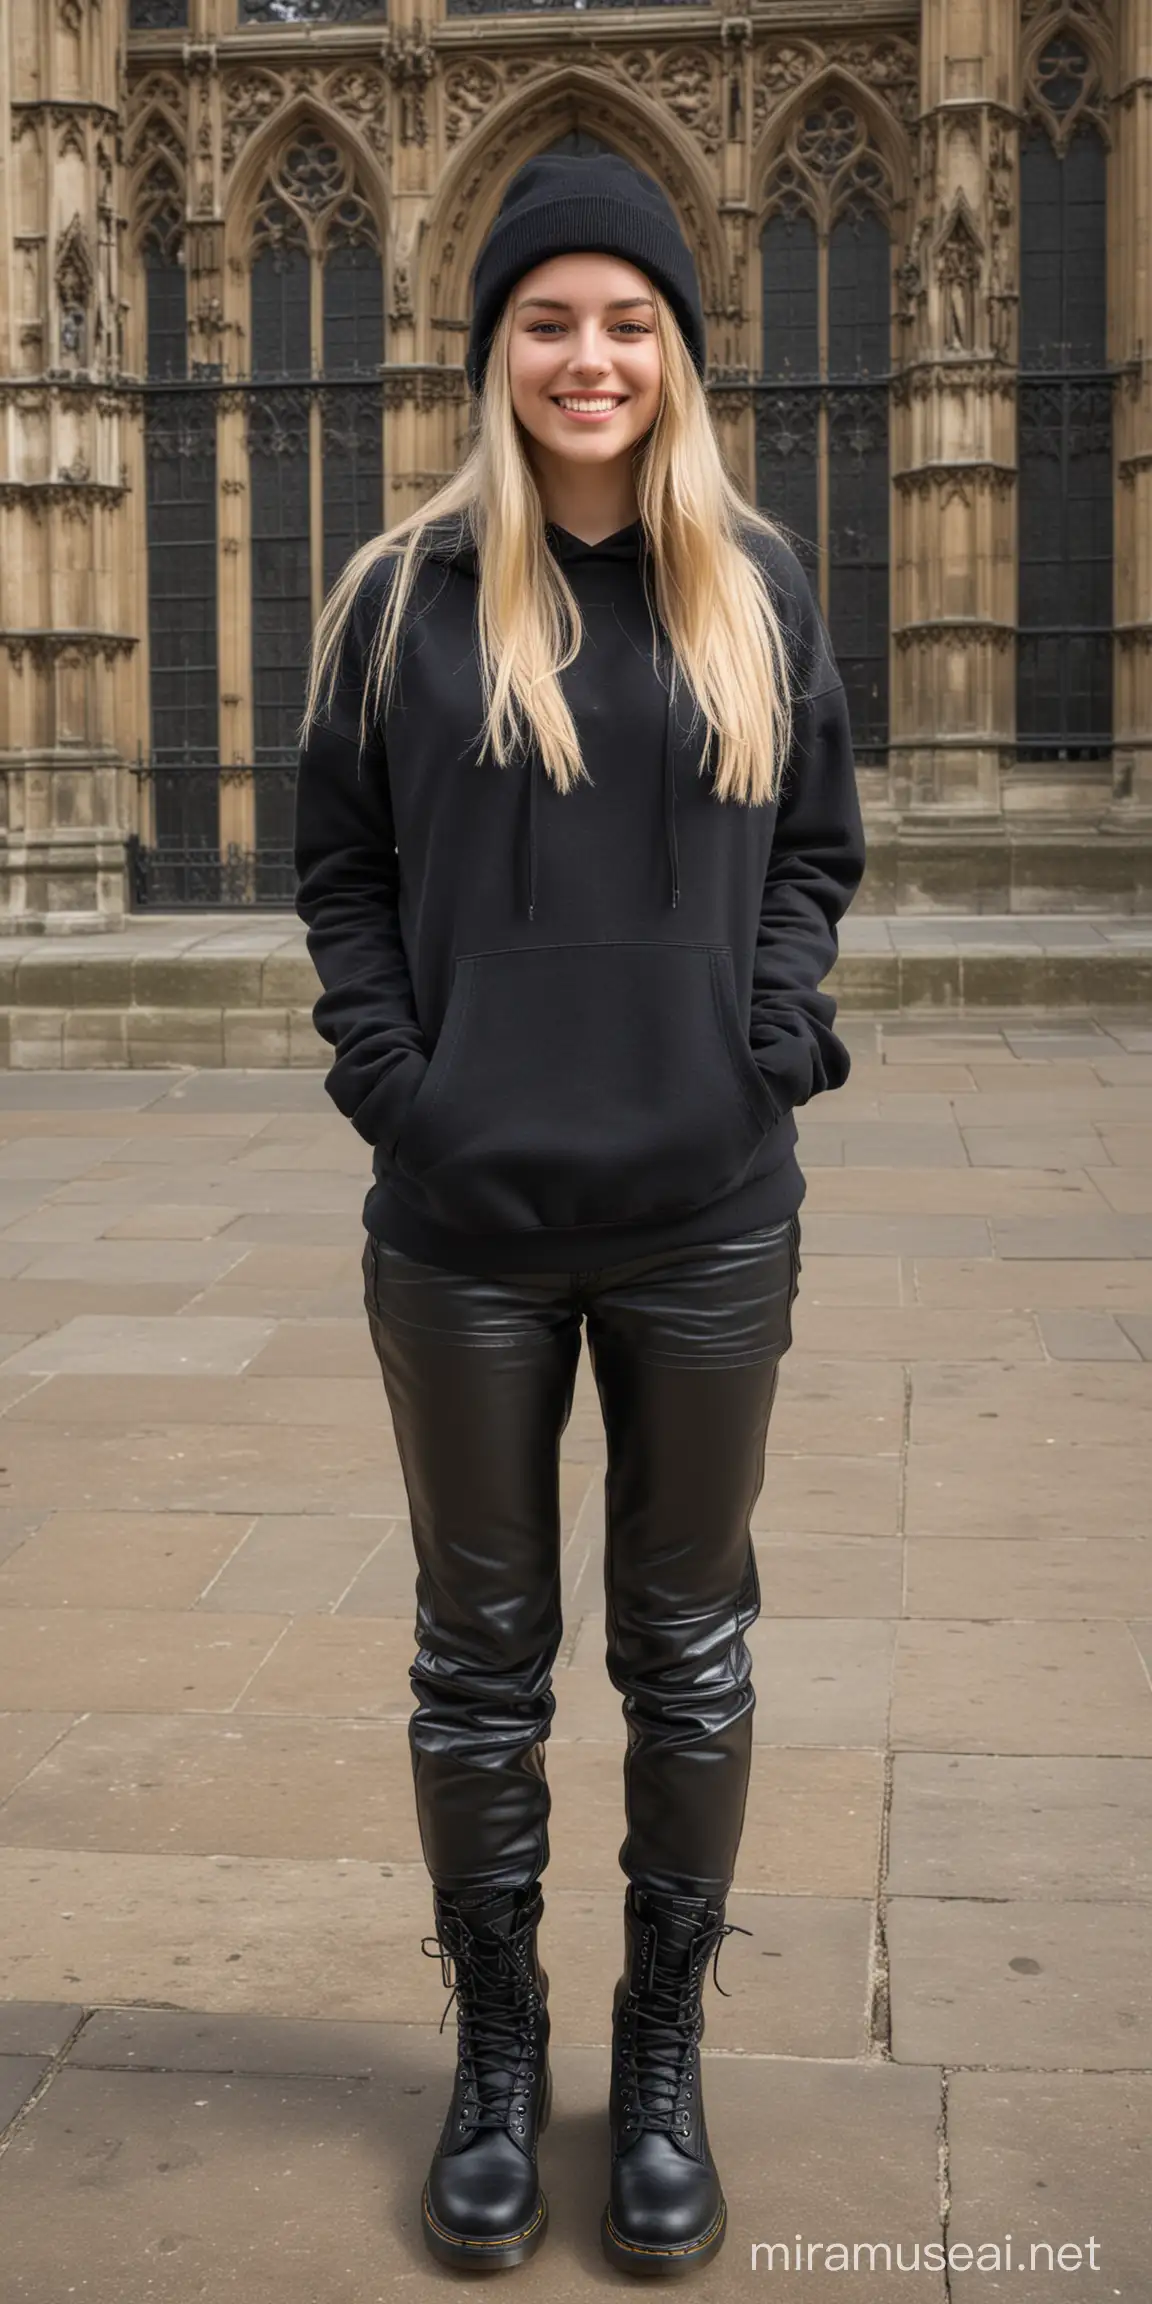 Young Woman with Hip Hop Style at Westminster Abbey